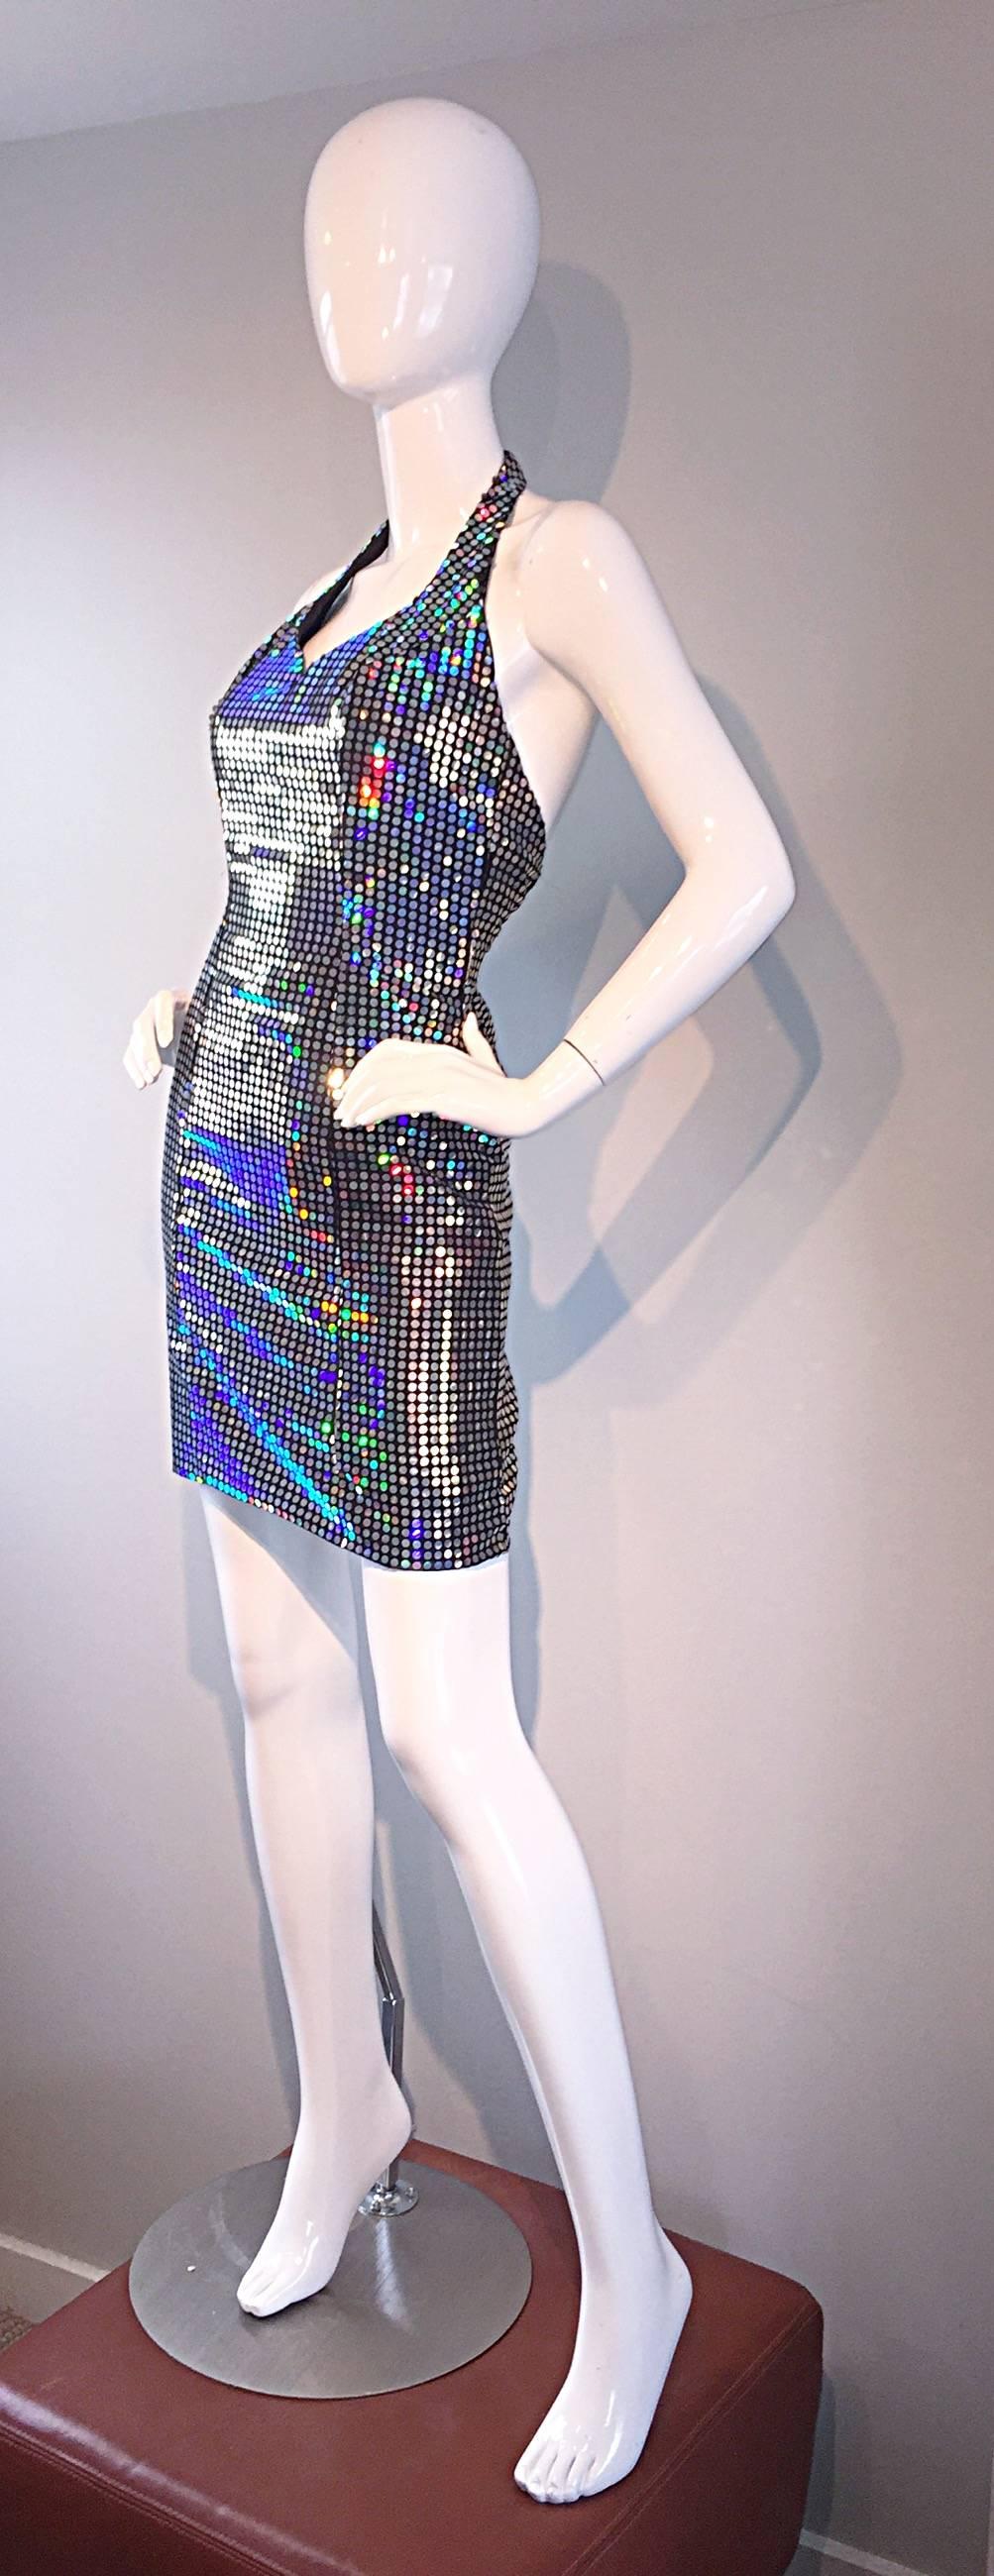 Women's Mike Benet 1990s Vintage Holographic Mirrored Bodycon Sexy 90s Halter Dress